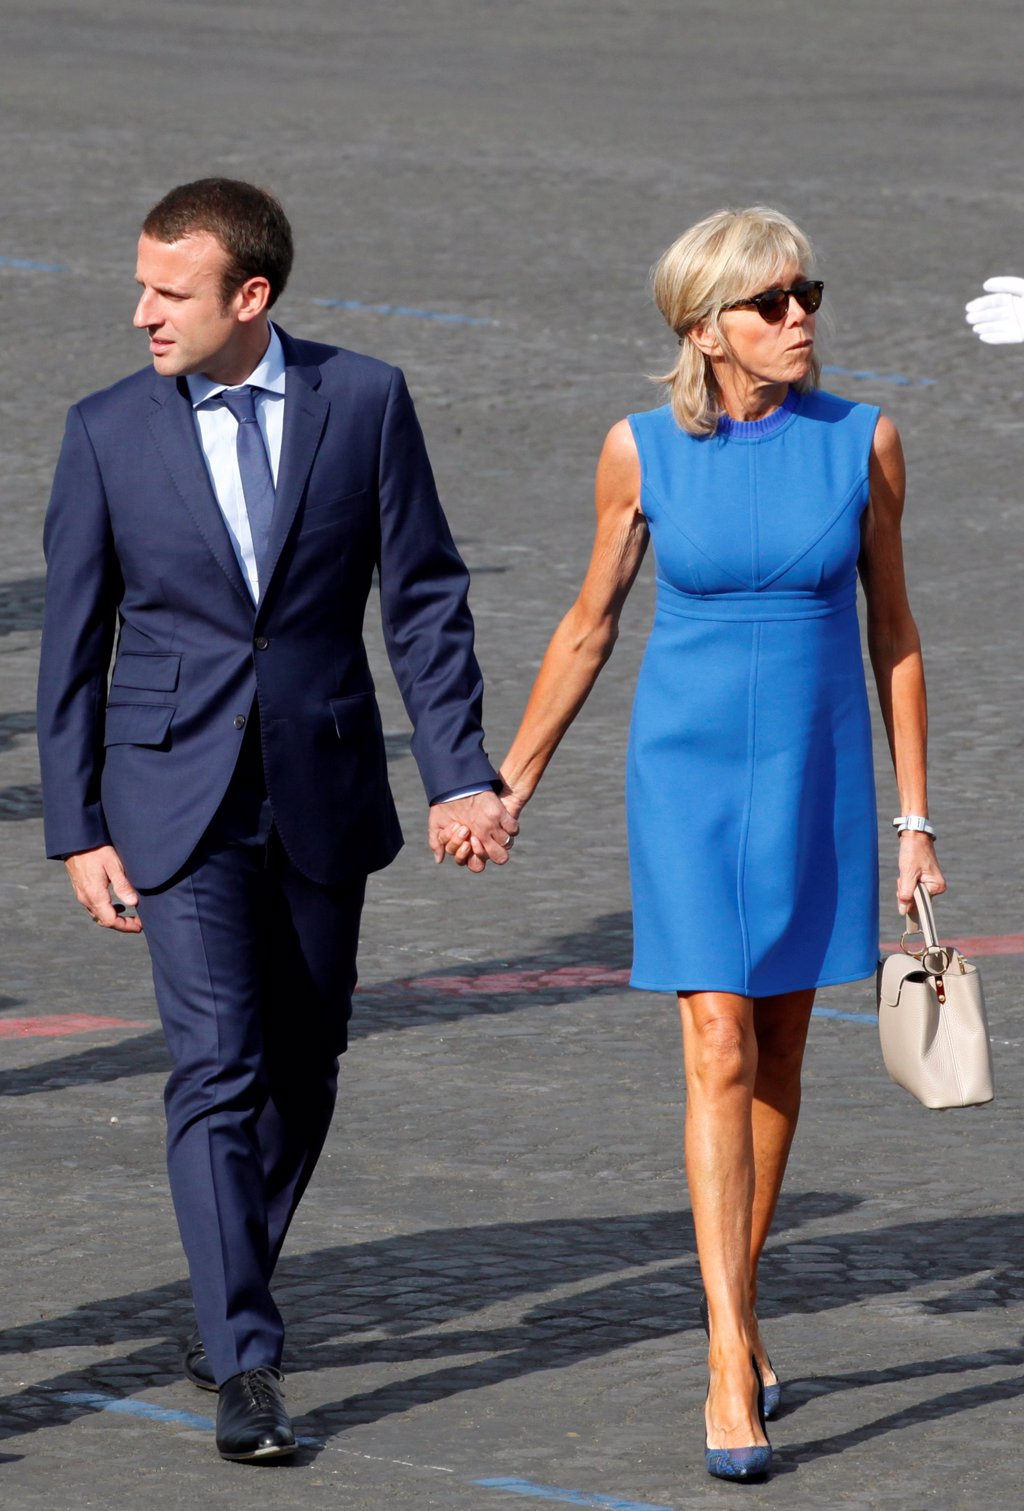 french president wife naked Sex Pics Hd